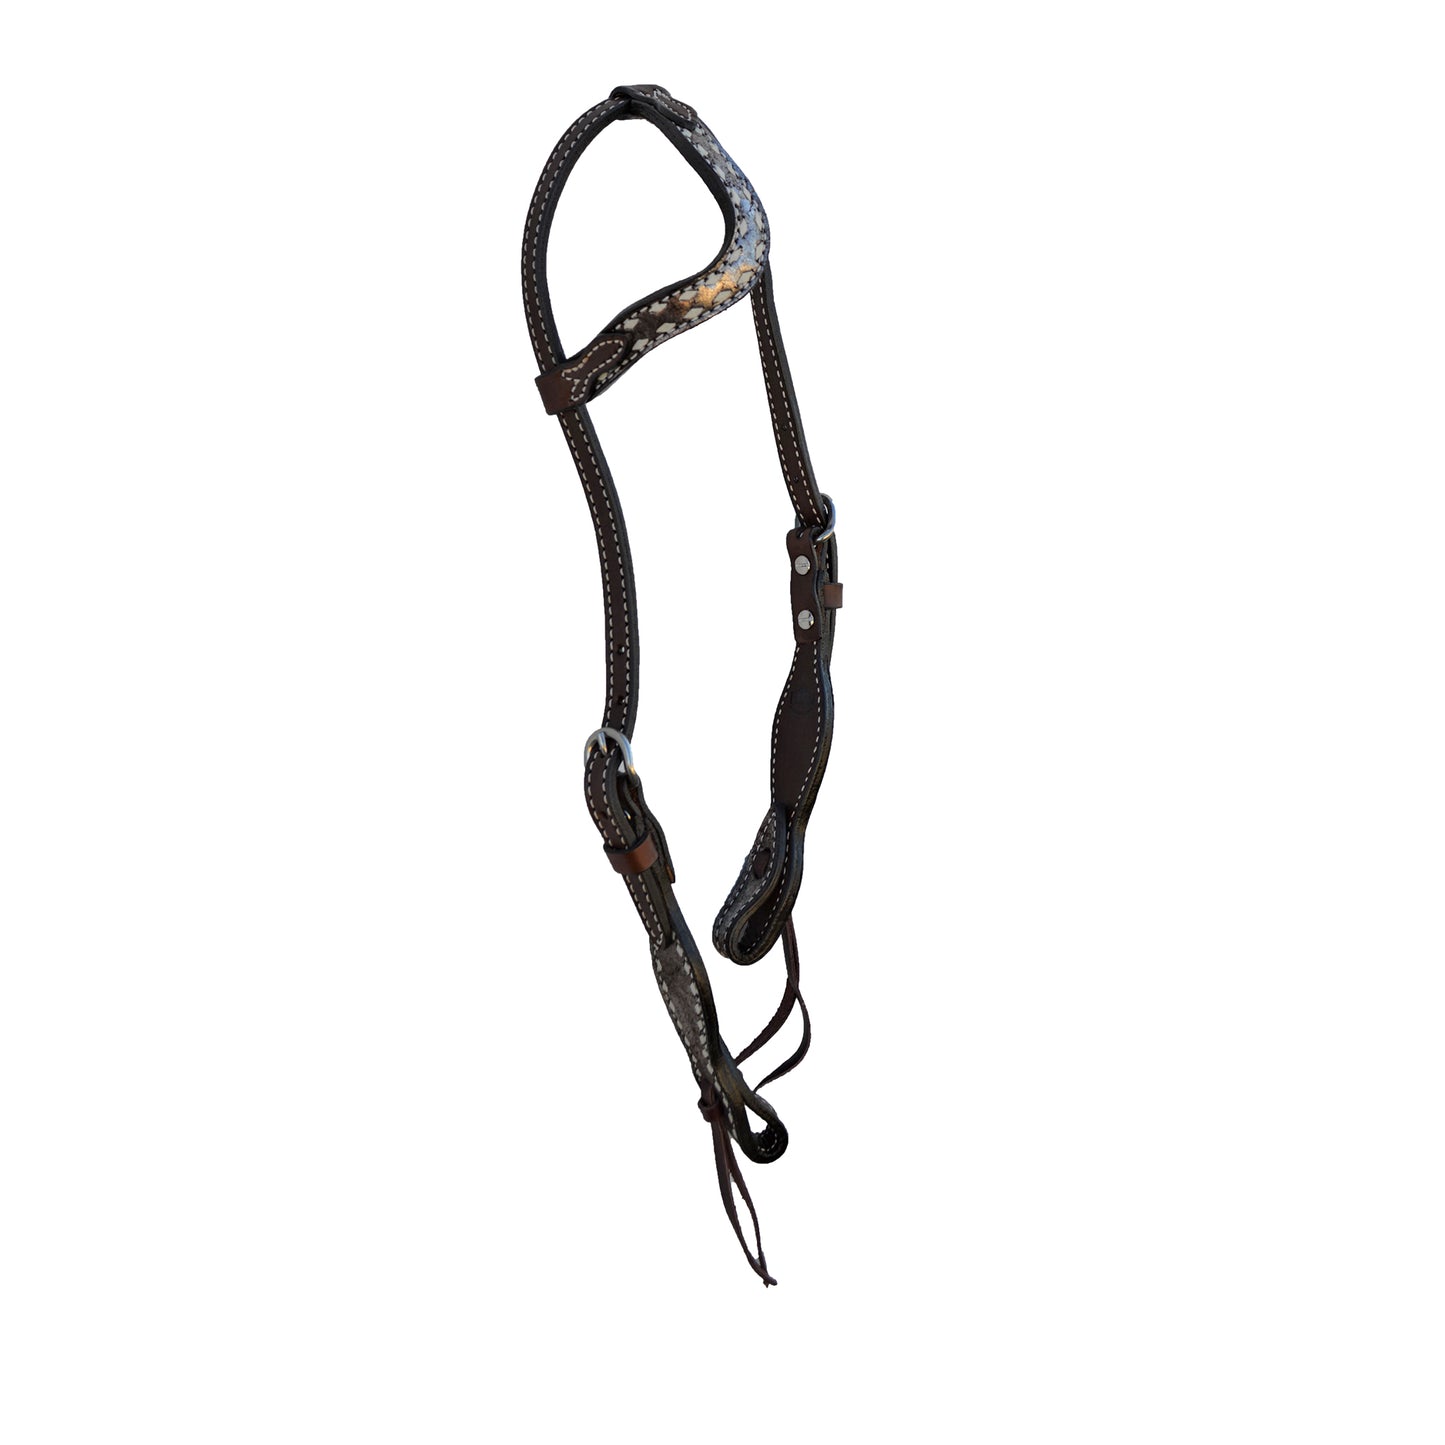 5/8" wave one ear headstall chocolate leather vintage metallic overlay with rawhide buckstitch.